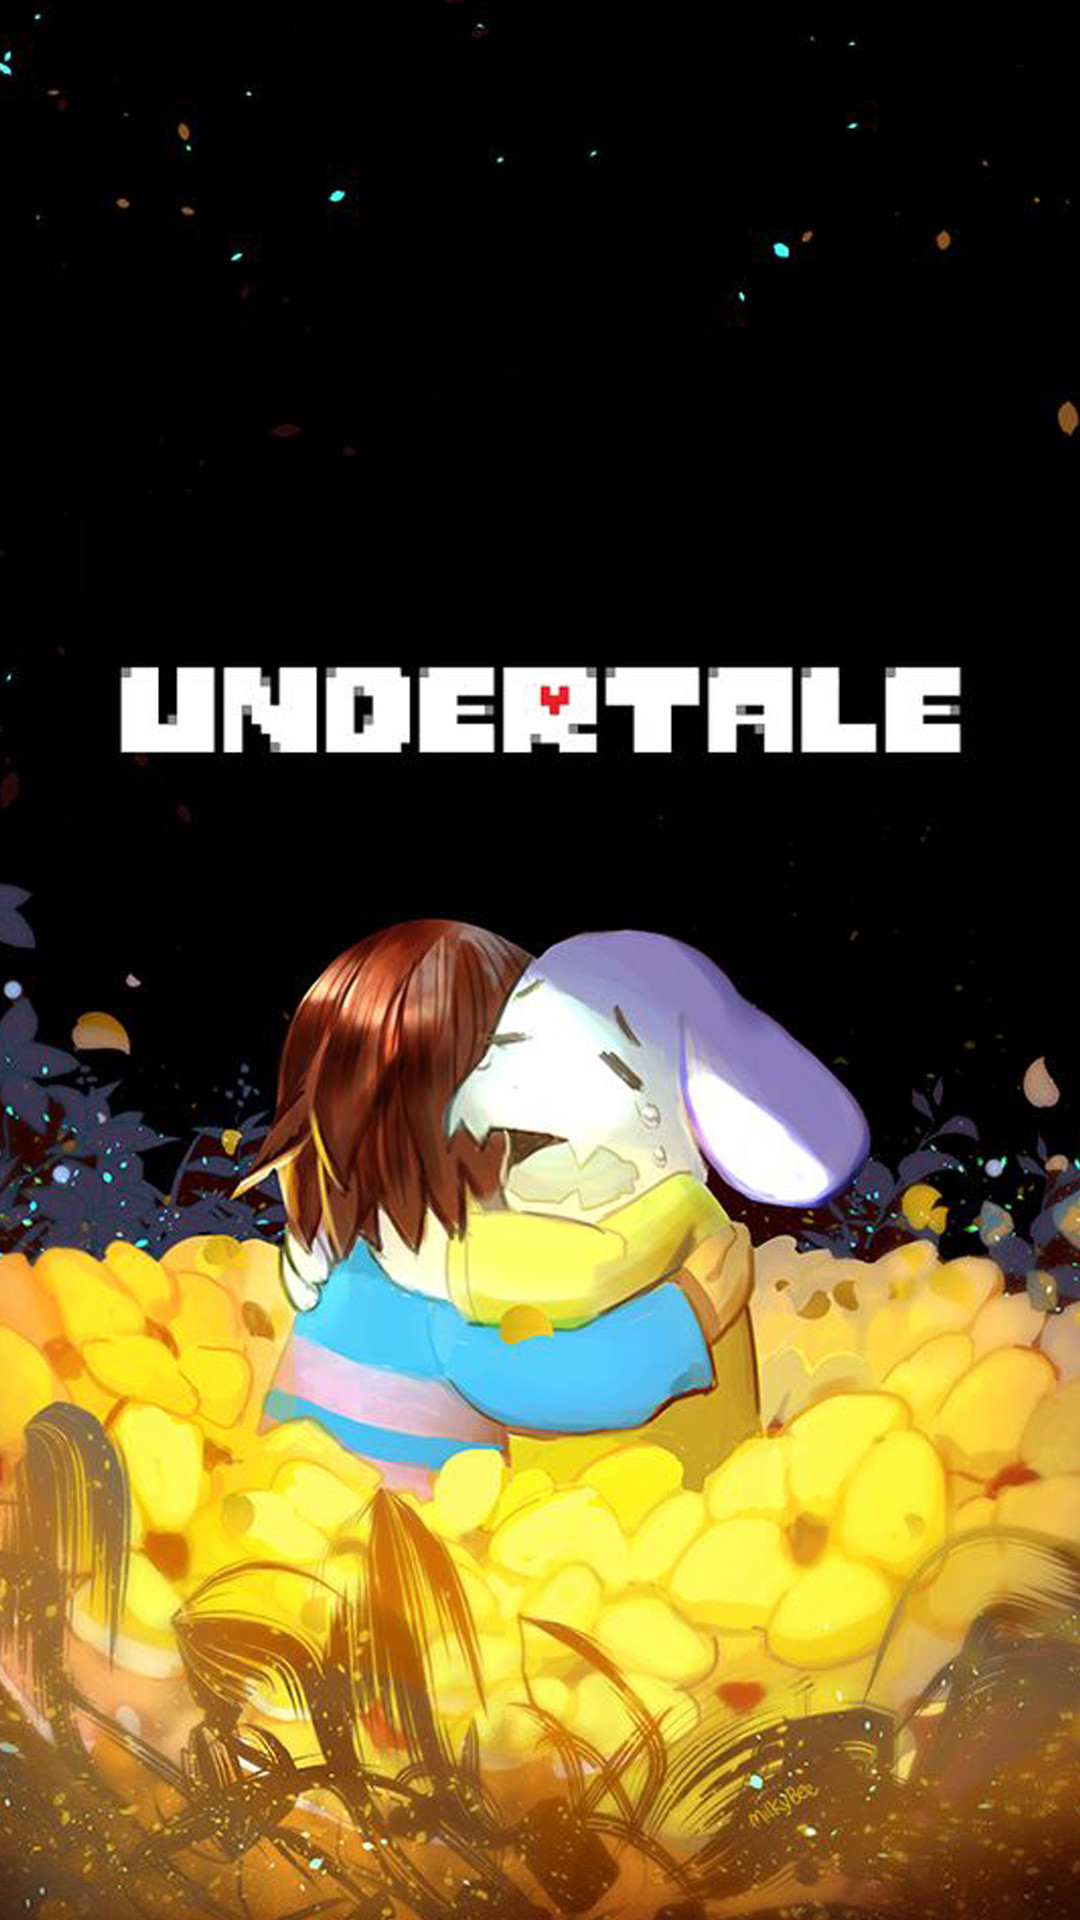 1080x1920 Undertale cool iphone backgrounds